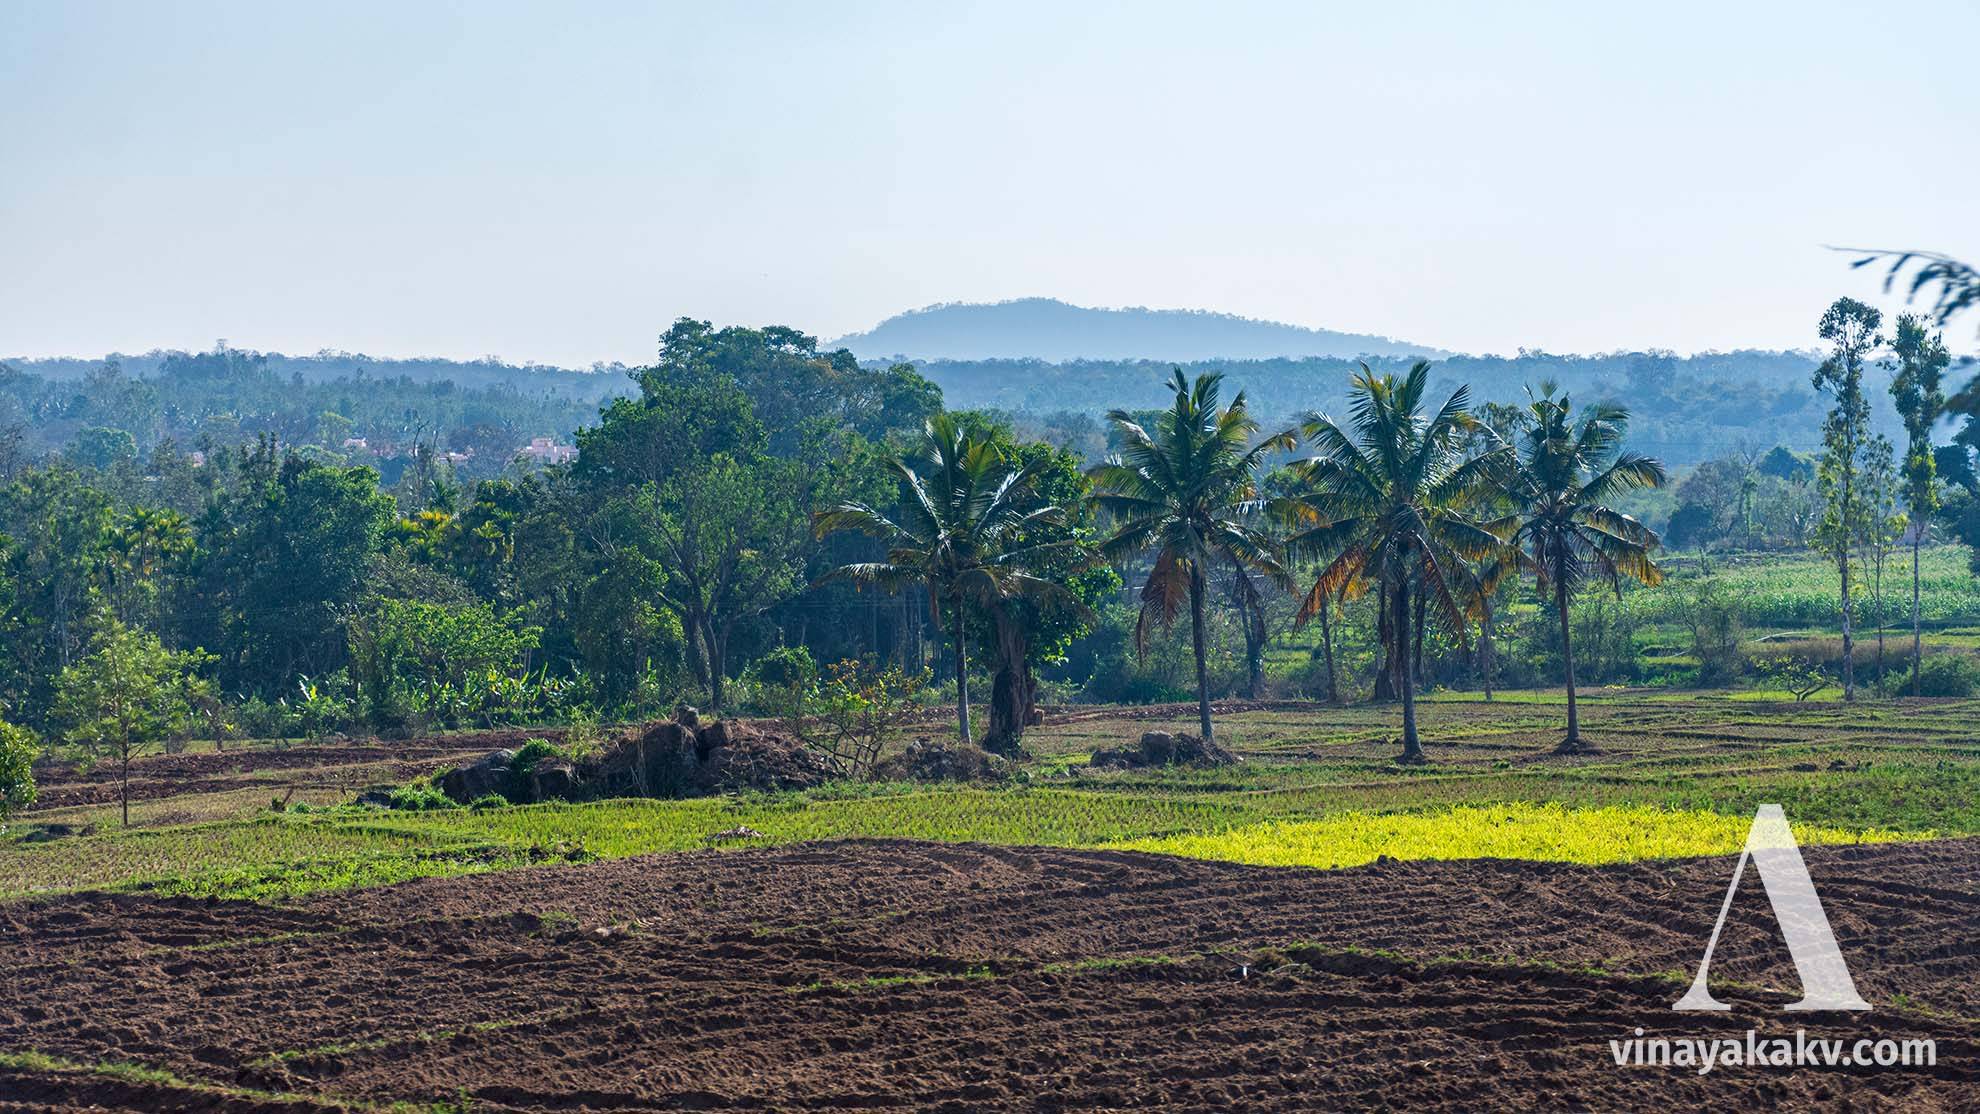 Agricultural fields near _Kushalanagar_. Notice relatively flat terrain compared to previous photographs.